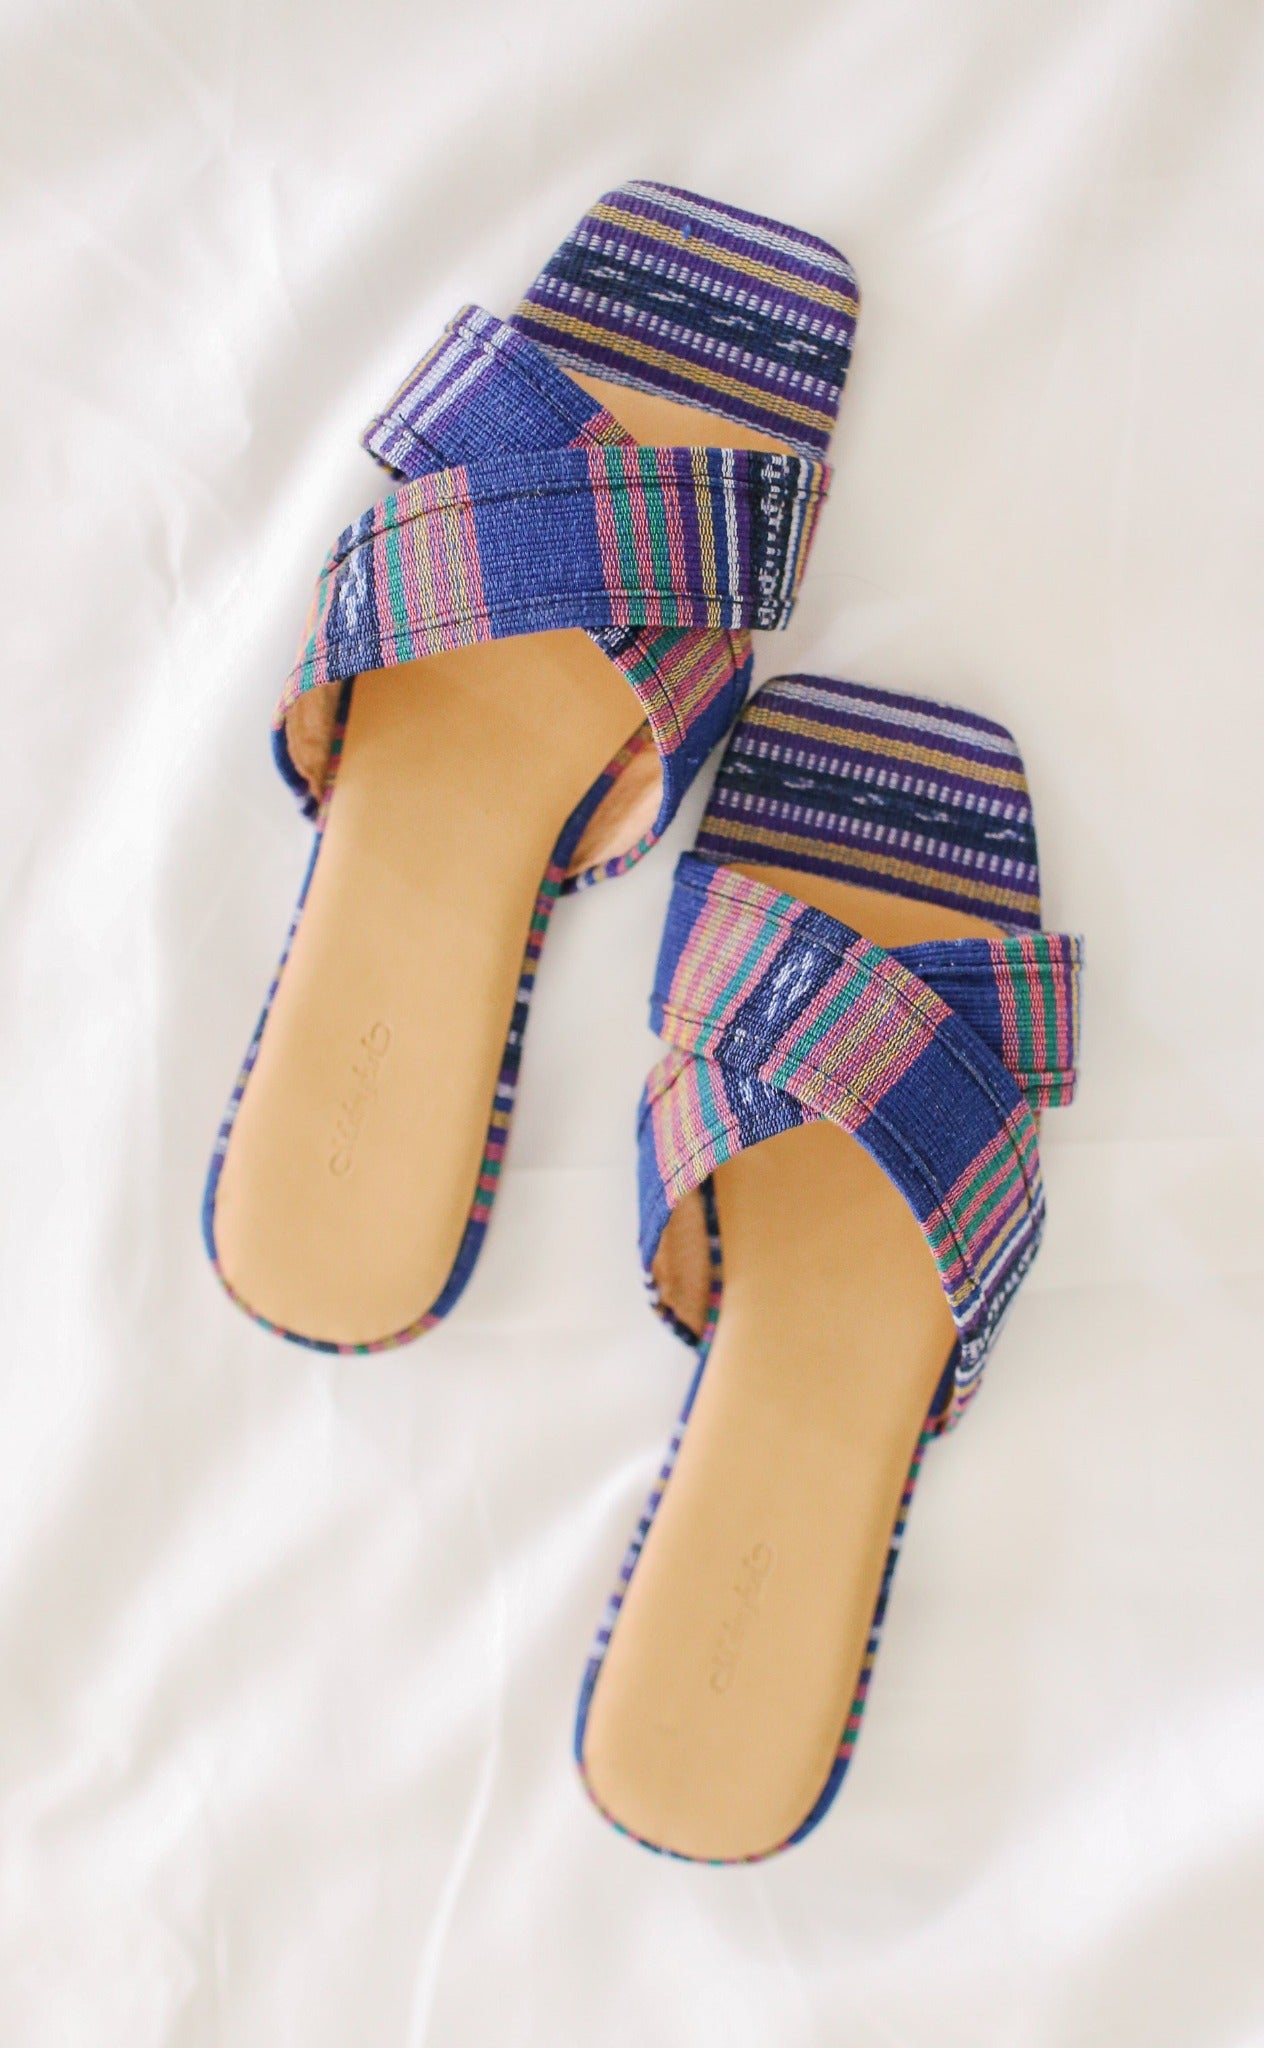 Marikina handcrafted leather slides  made of handwoven textile from the Mindanao, Philippines